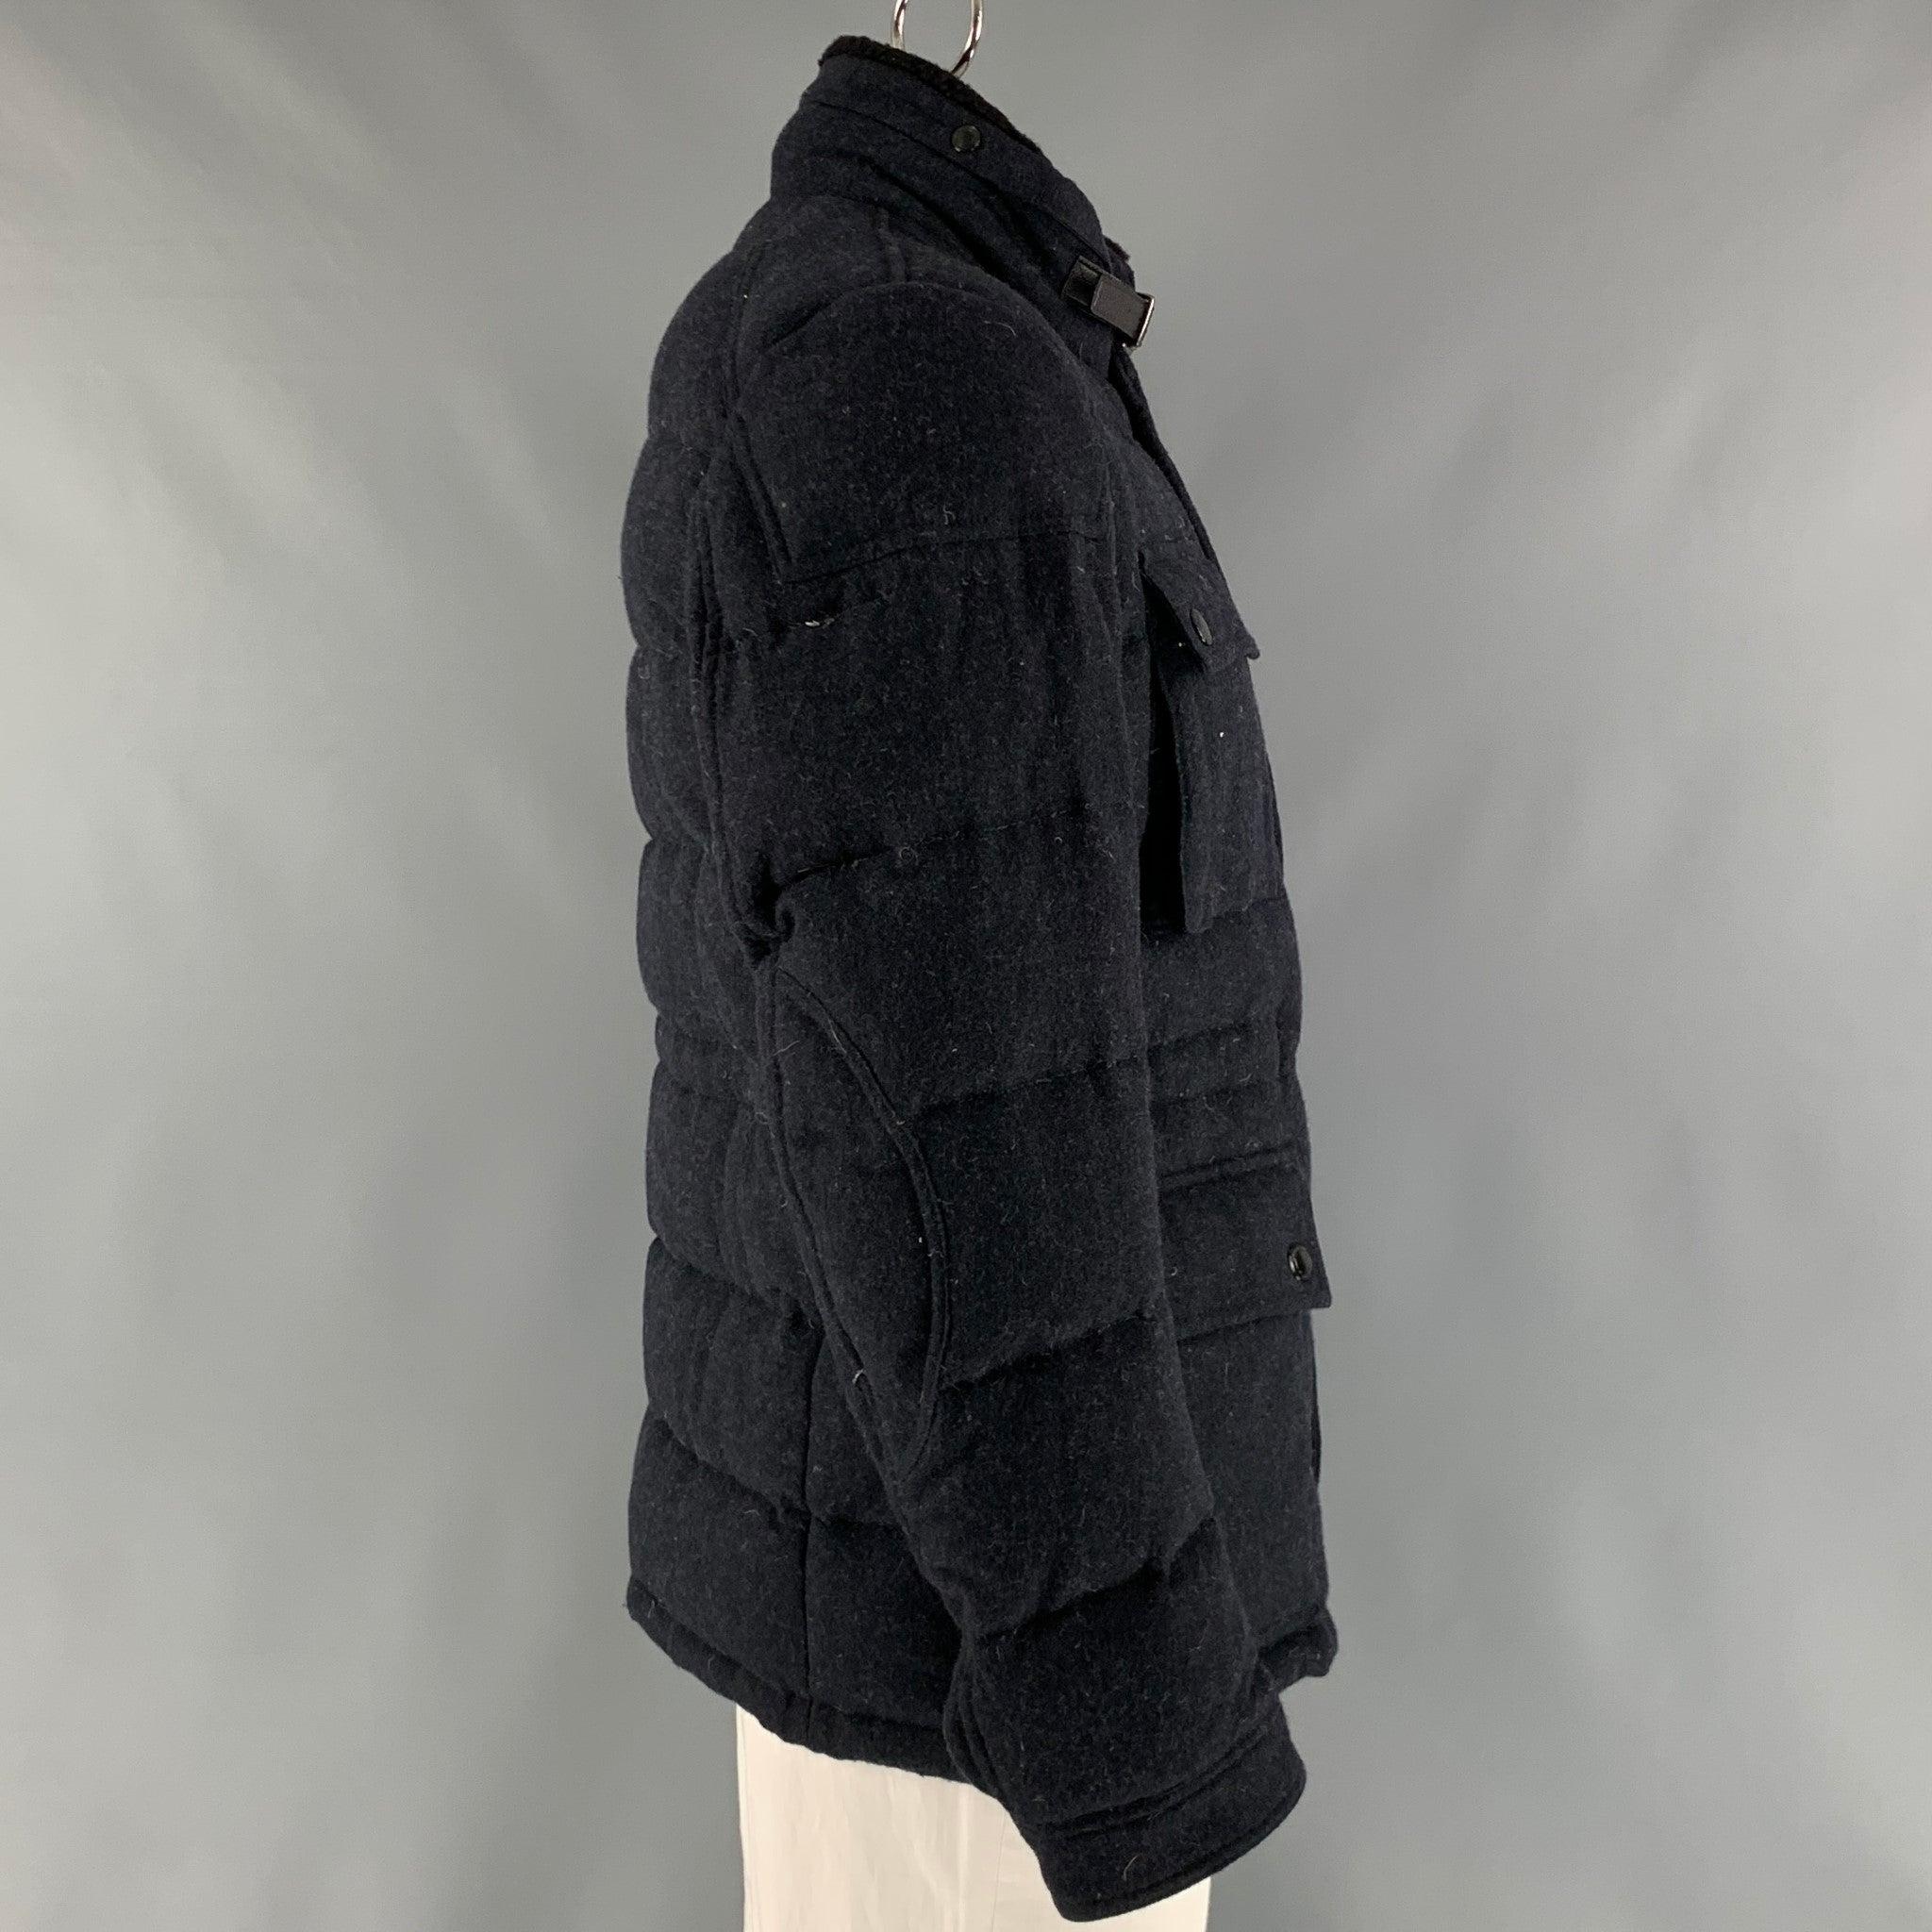 BURBERRY BRIT coat comes in a navy wool and polyamide fleece material with a plaid lining featuring a quilted style, detachable collar, flap pockets, and a 
zip up closure. Very Good Pre-Owned Condition. Minor mark at left back shoulder. 

Marked:  